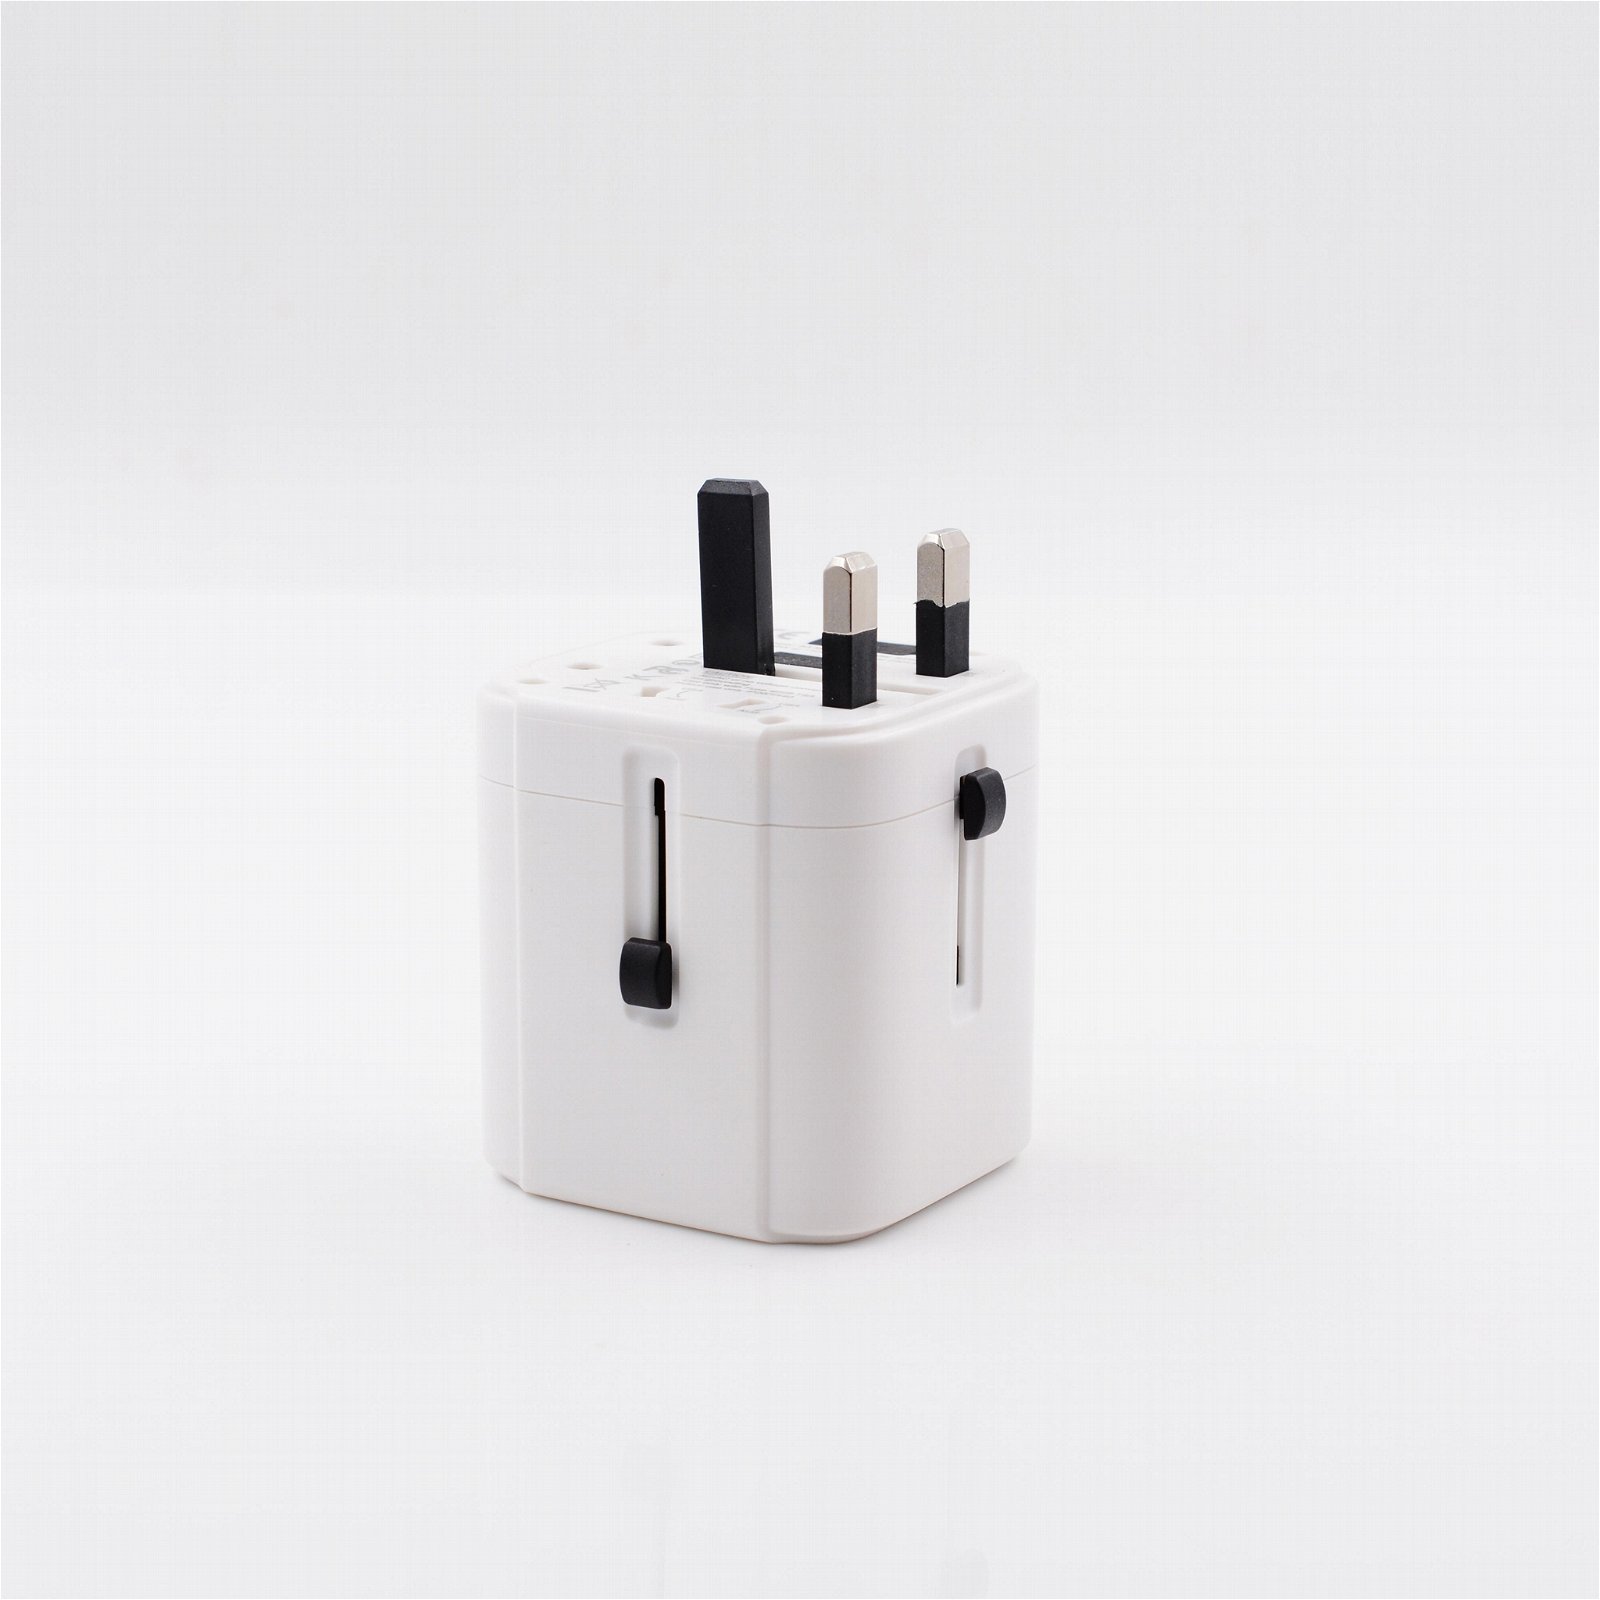 2019 gift promotion travel adapter with Taye C USB 4.5A plug adapter  5